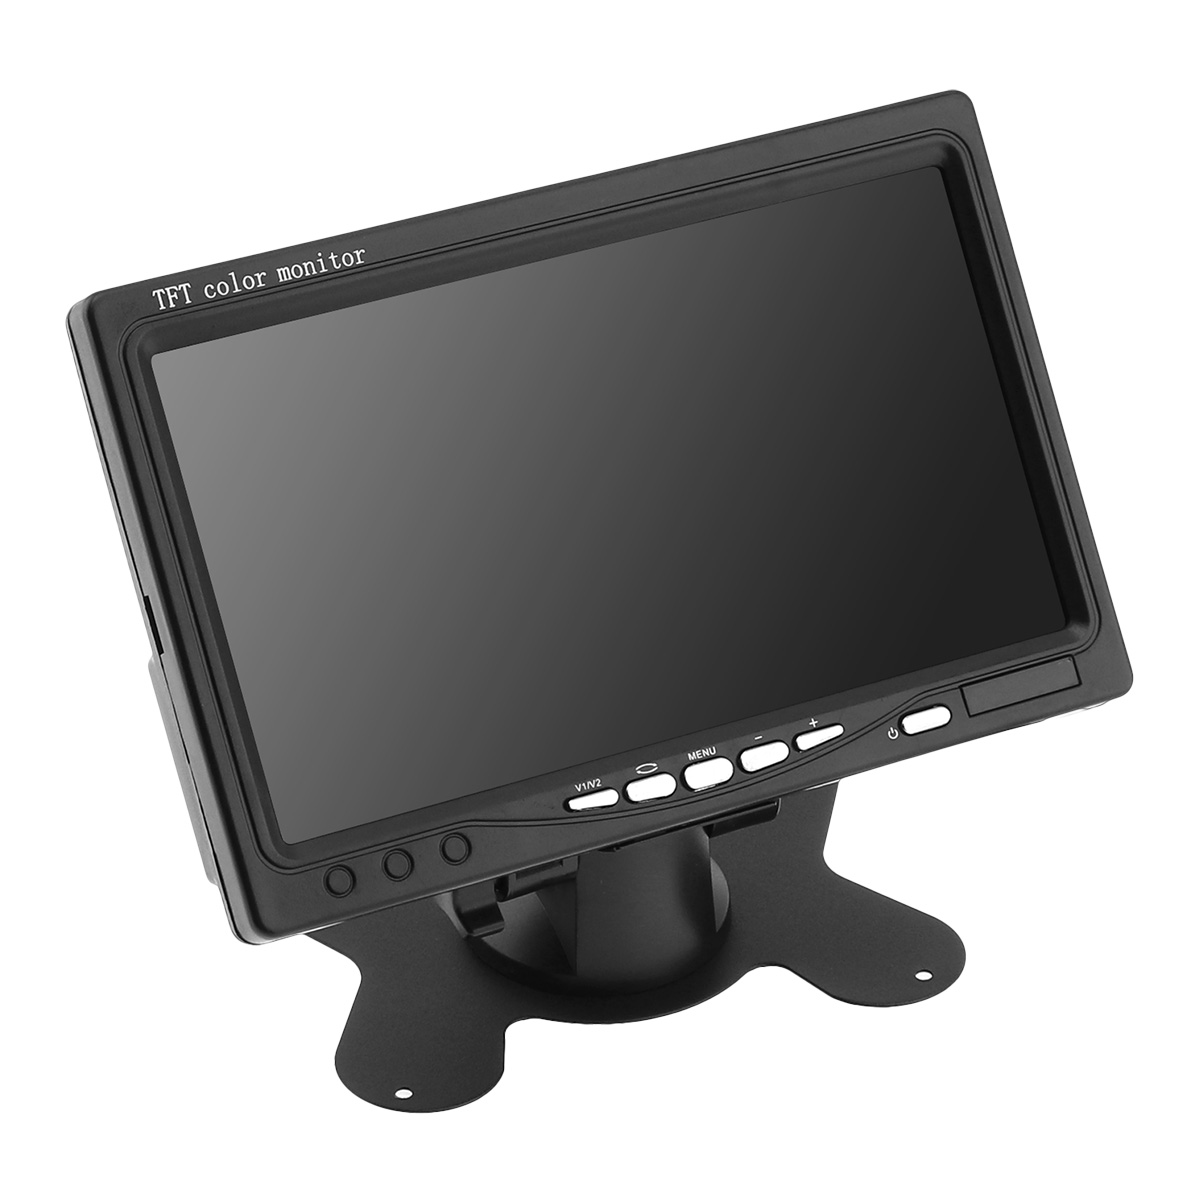 7 inch TFT Auto LCD Color Monitor 2CH Video Input